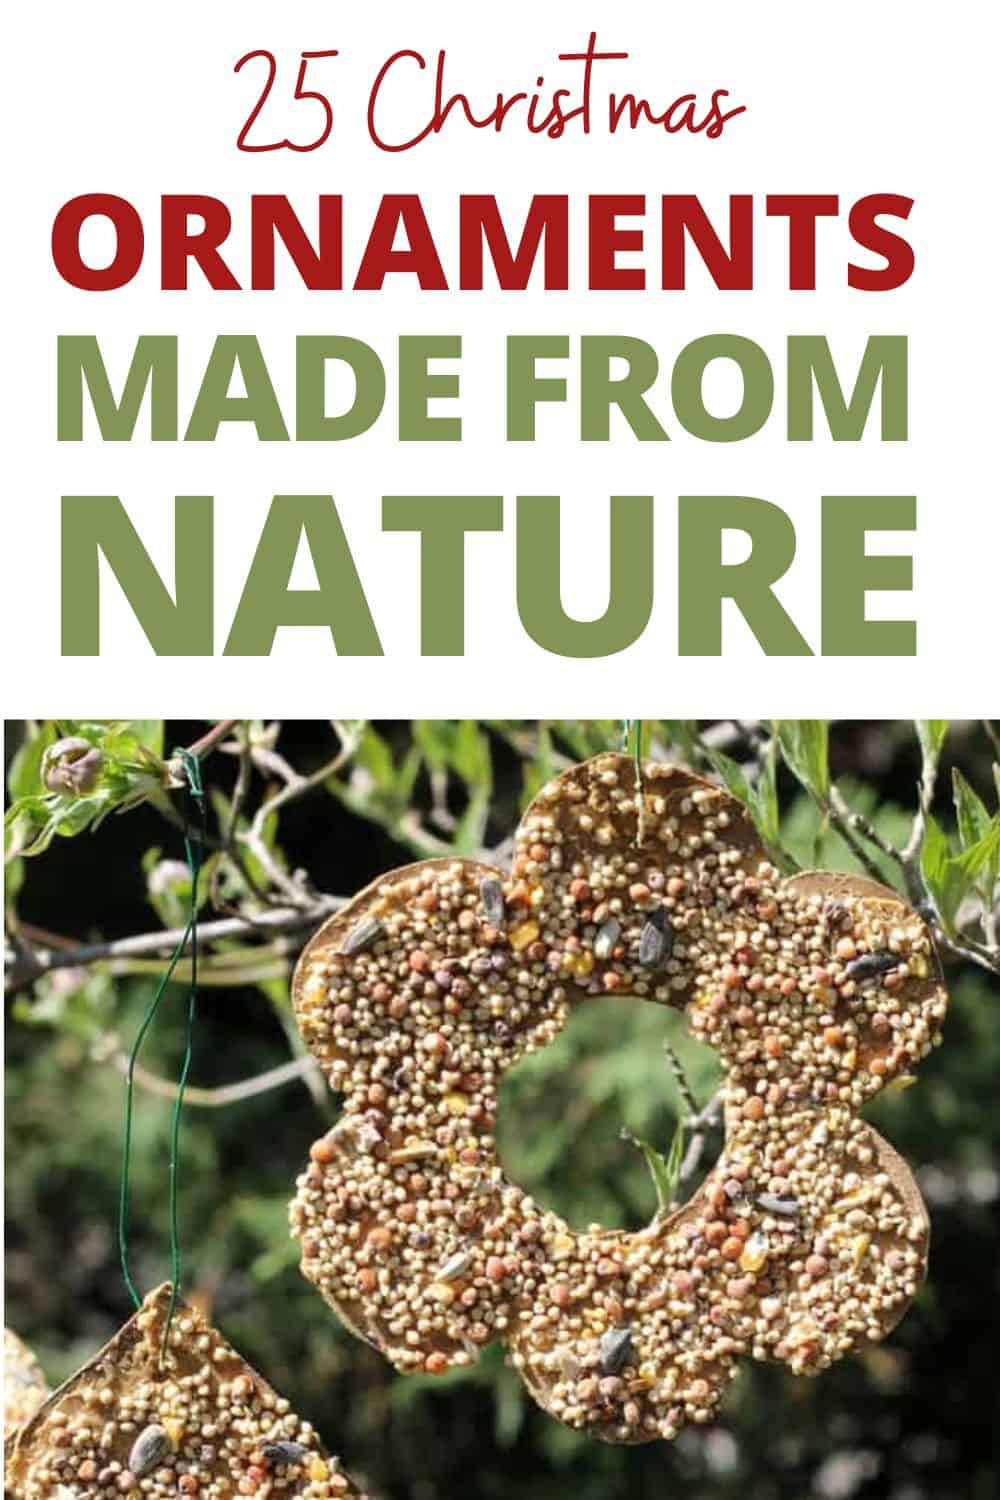 25 Easy Christmas ornaments made from nature or nature-inspired, perfect for kids to make